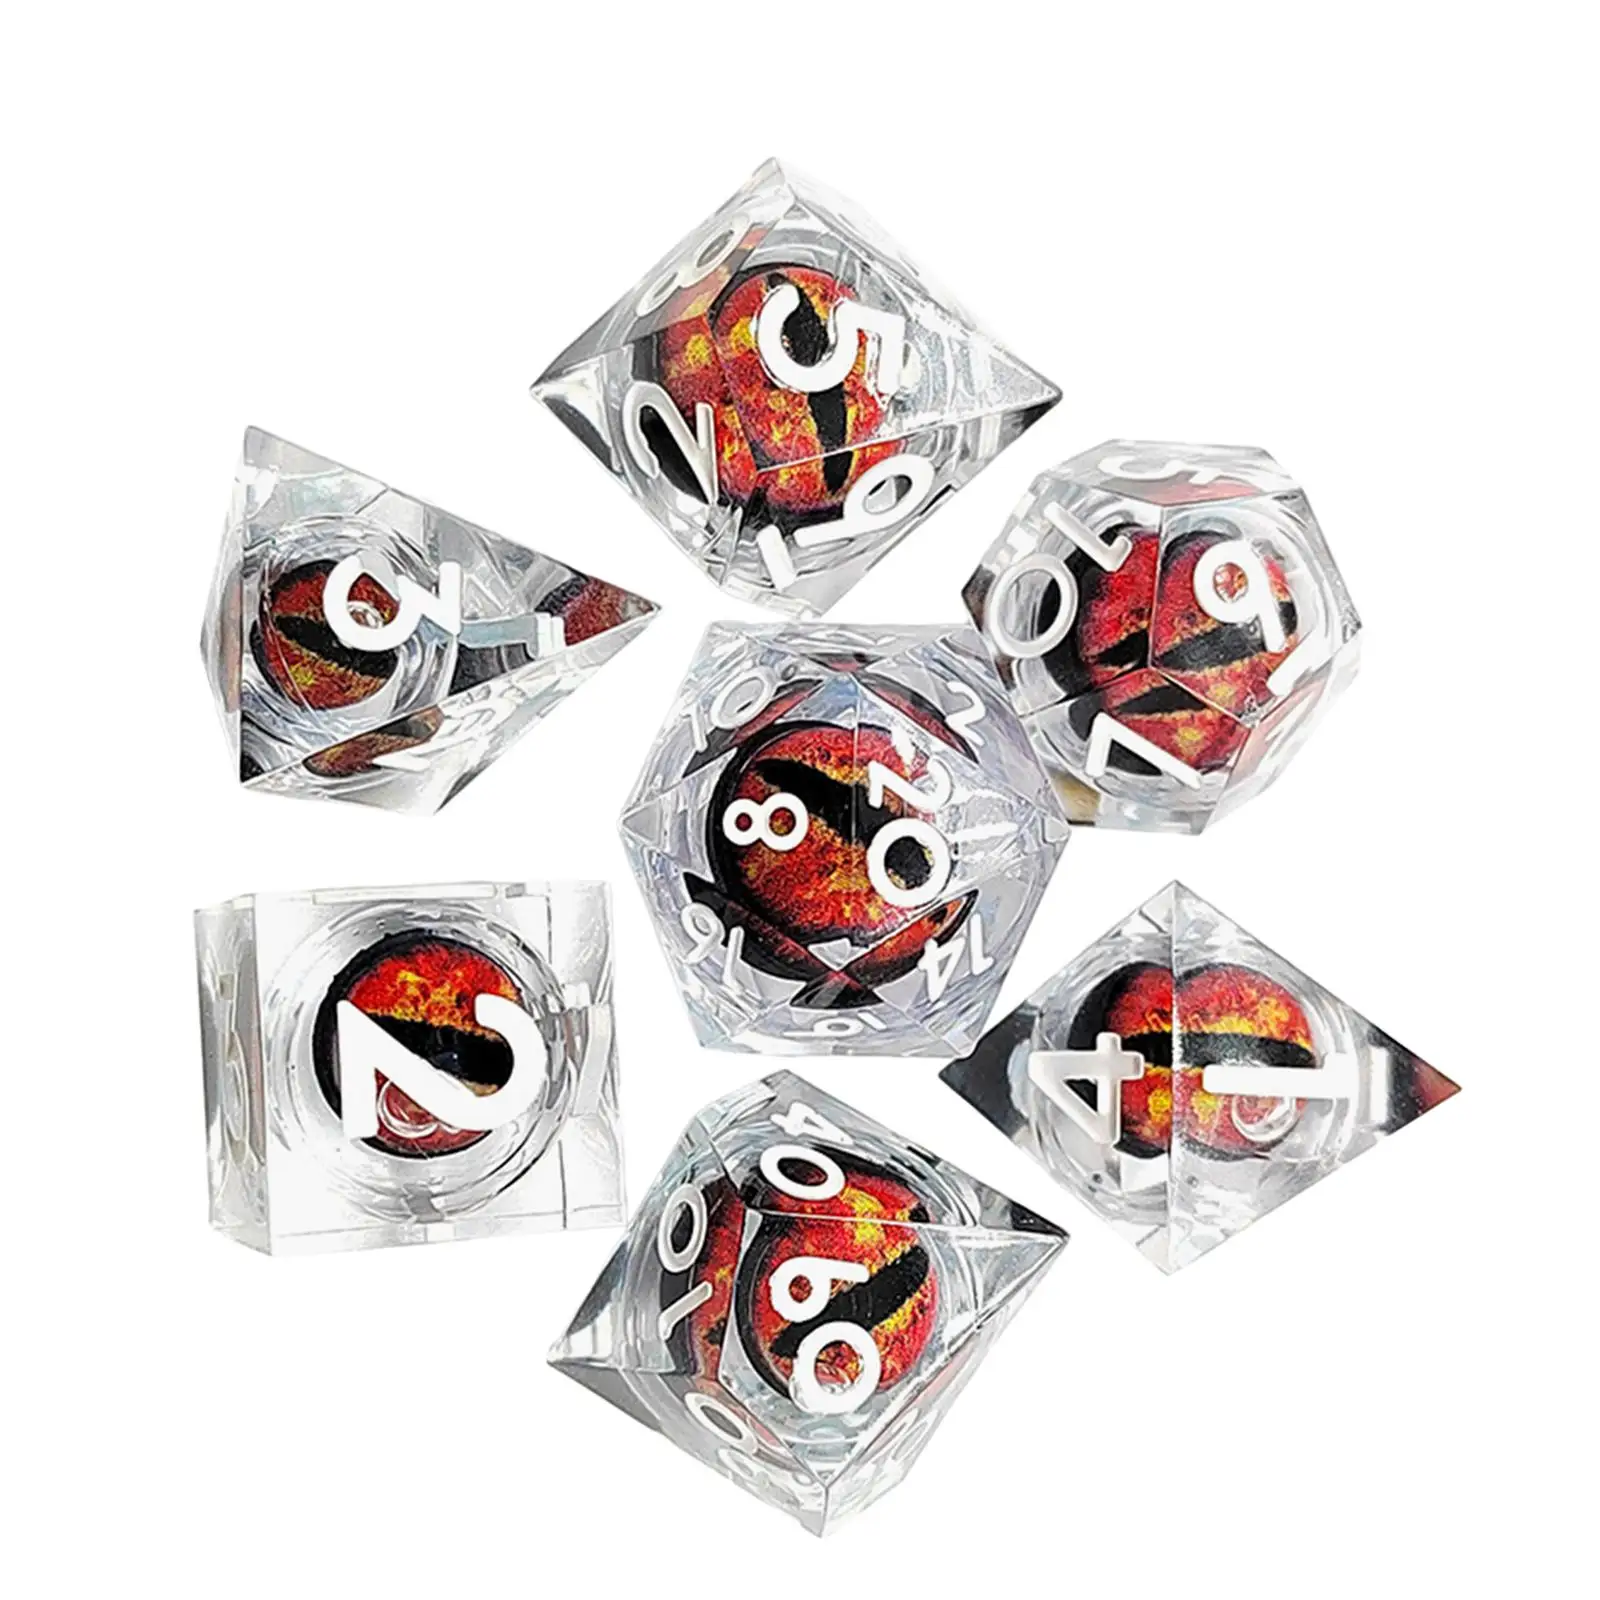 Resin Polyhedral Eye Dice 7Pcs Set Accessories for Dice Collecting